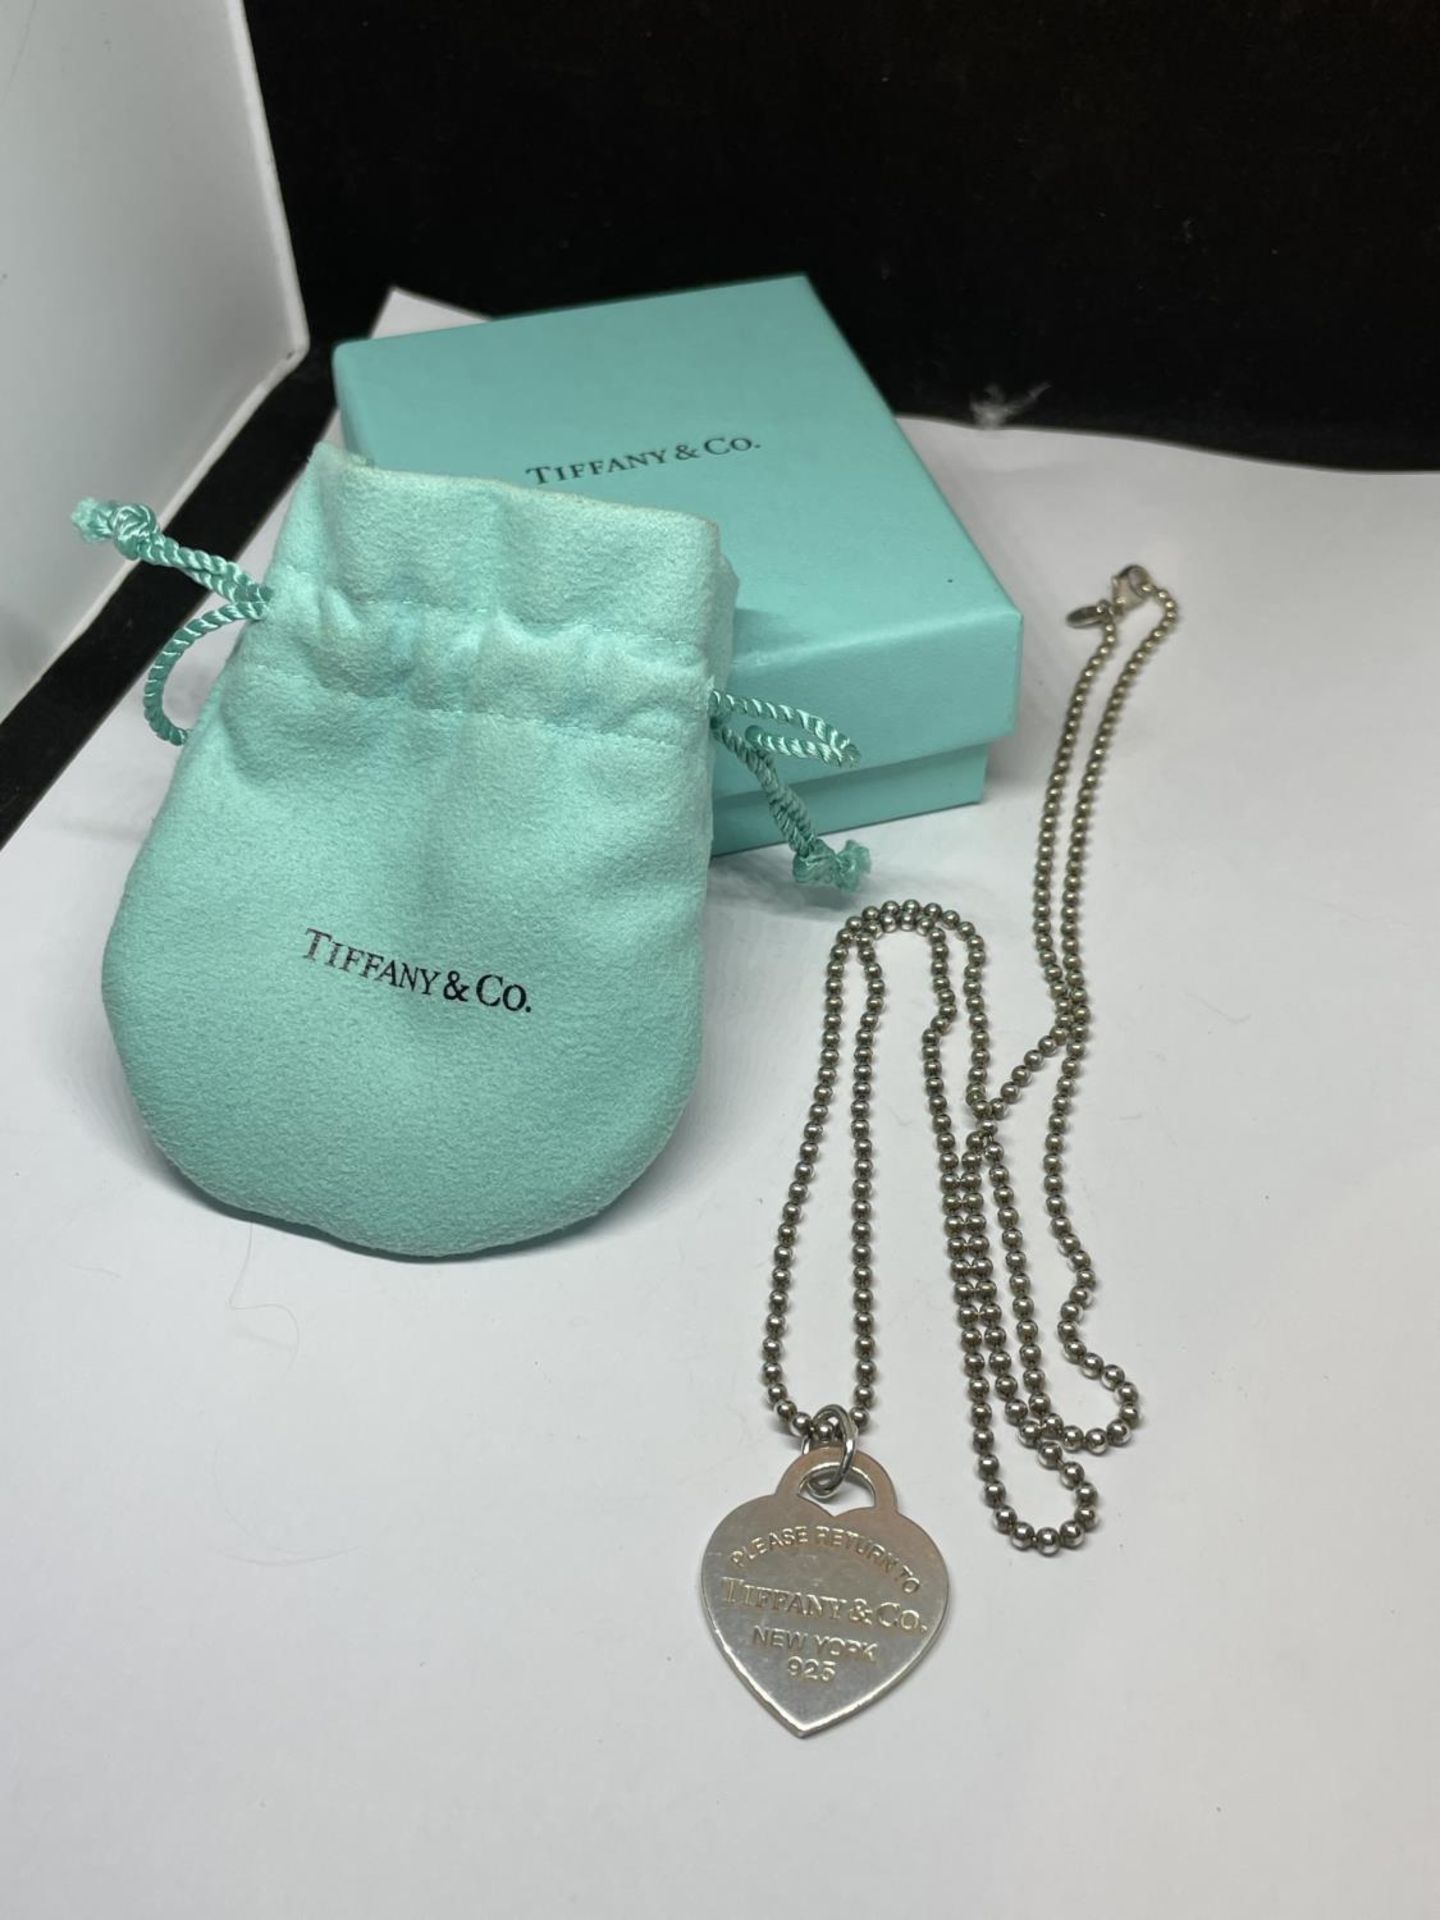 A TIFFANY NECKLACE AND LARGE HEART PENDANT CHAIN LENGTH 76CM HEART 3CM X 2.5CM WITH ORIGINAL POUCH